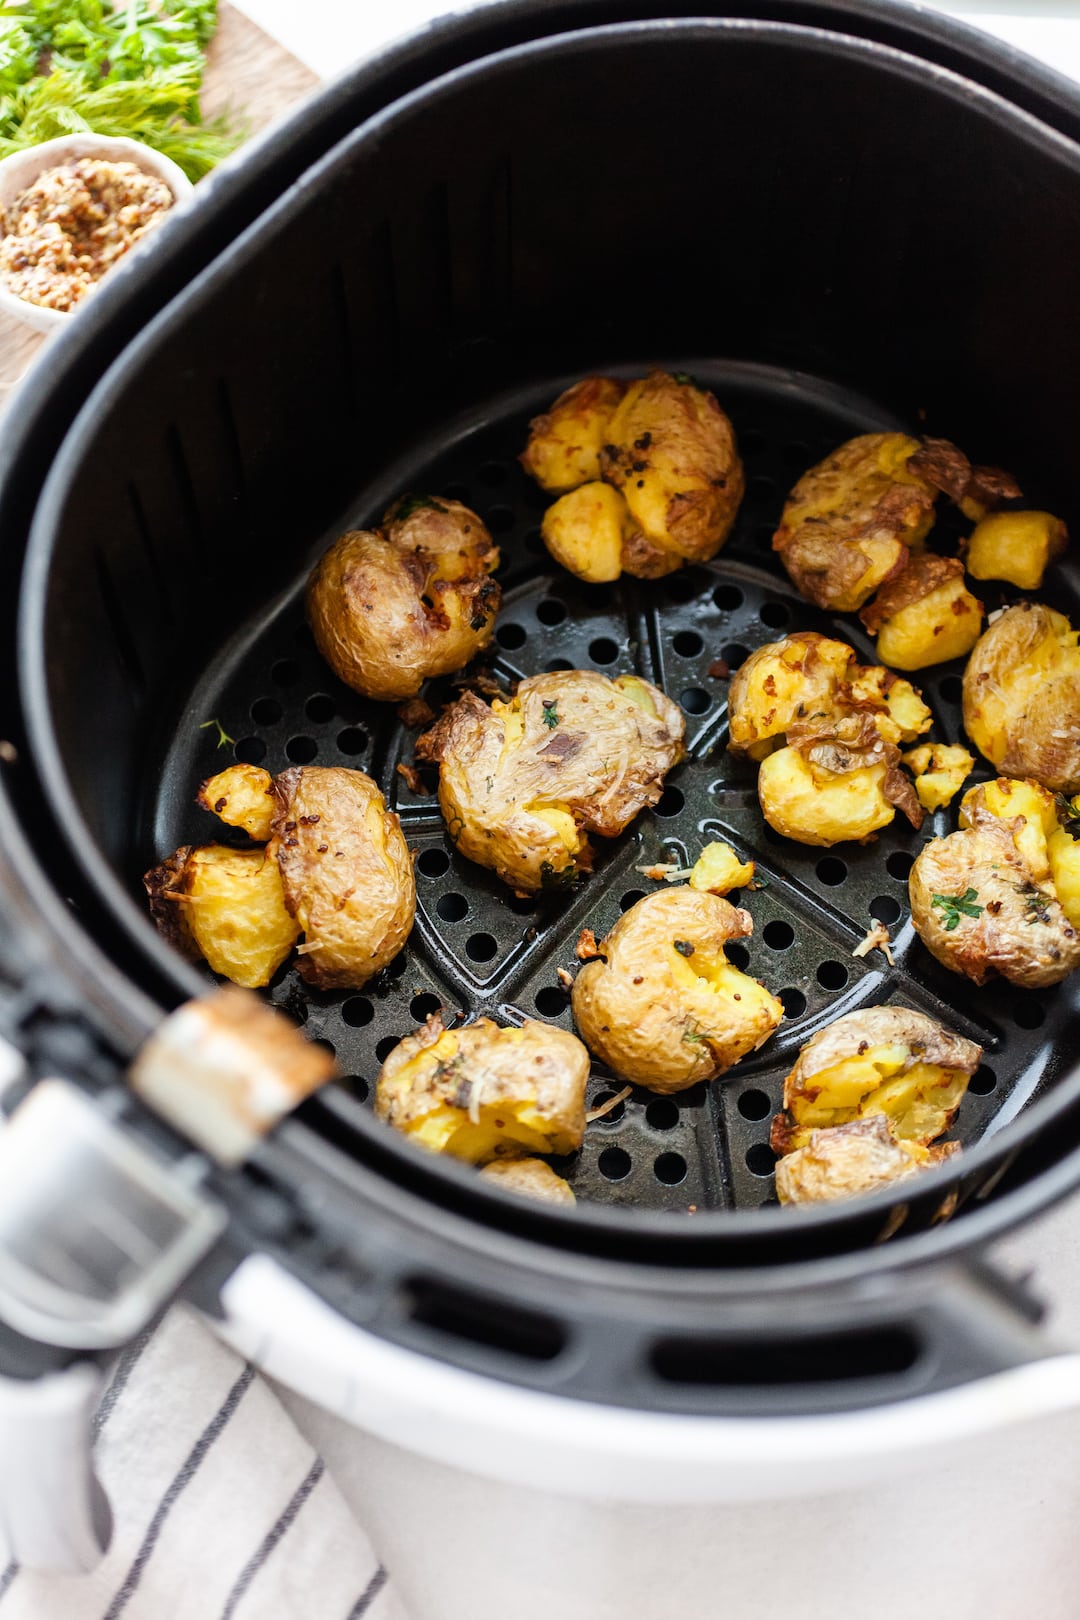 image of an air fryer basket filled with crispy smashed potatoes